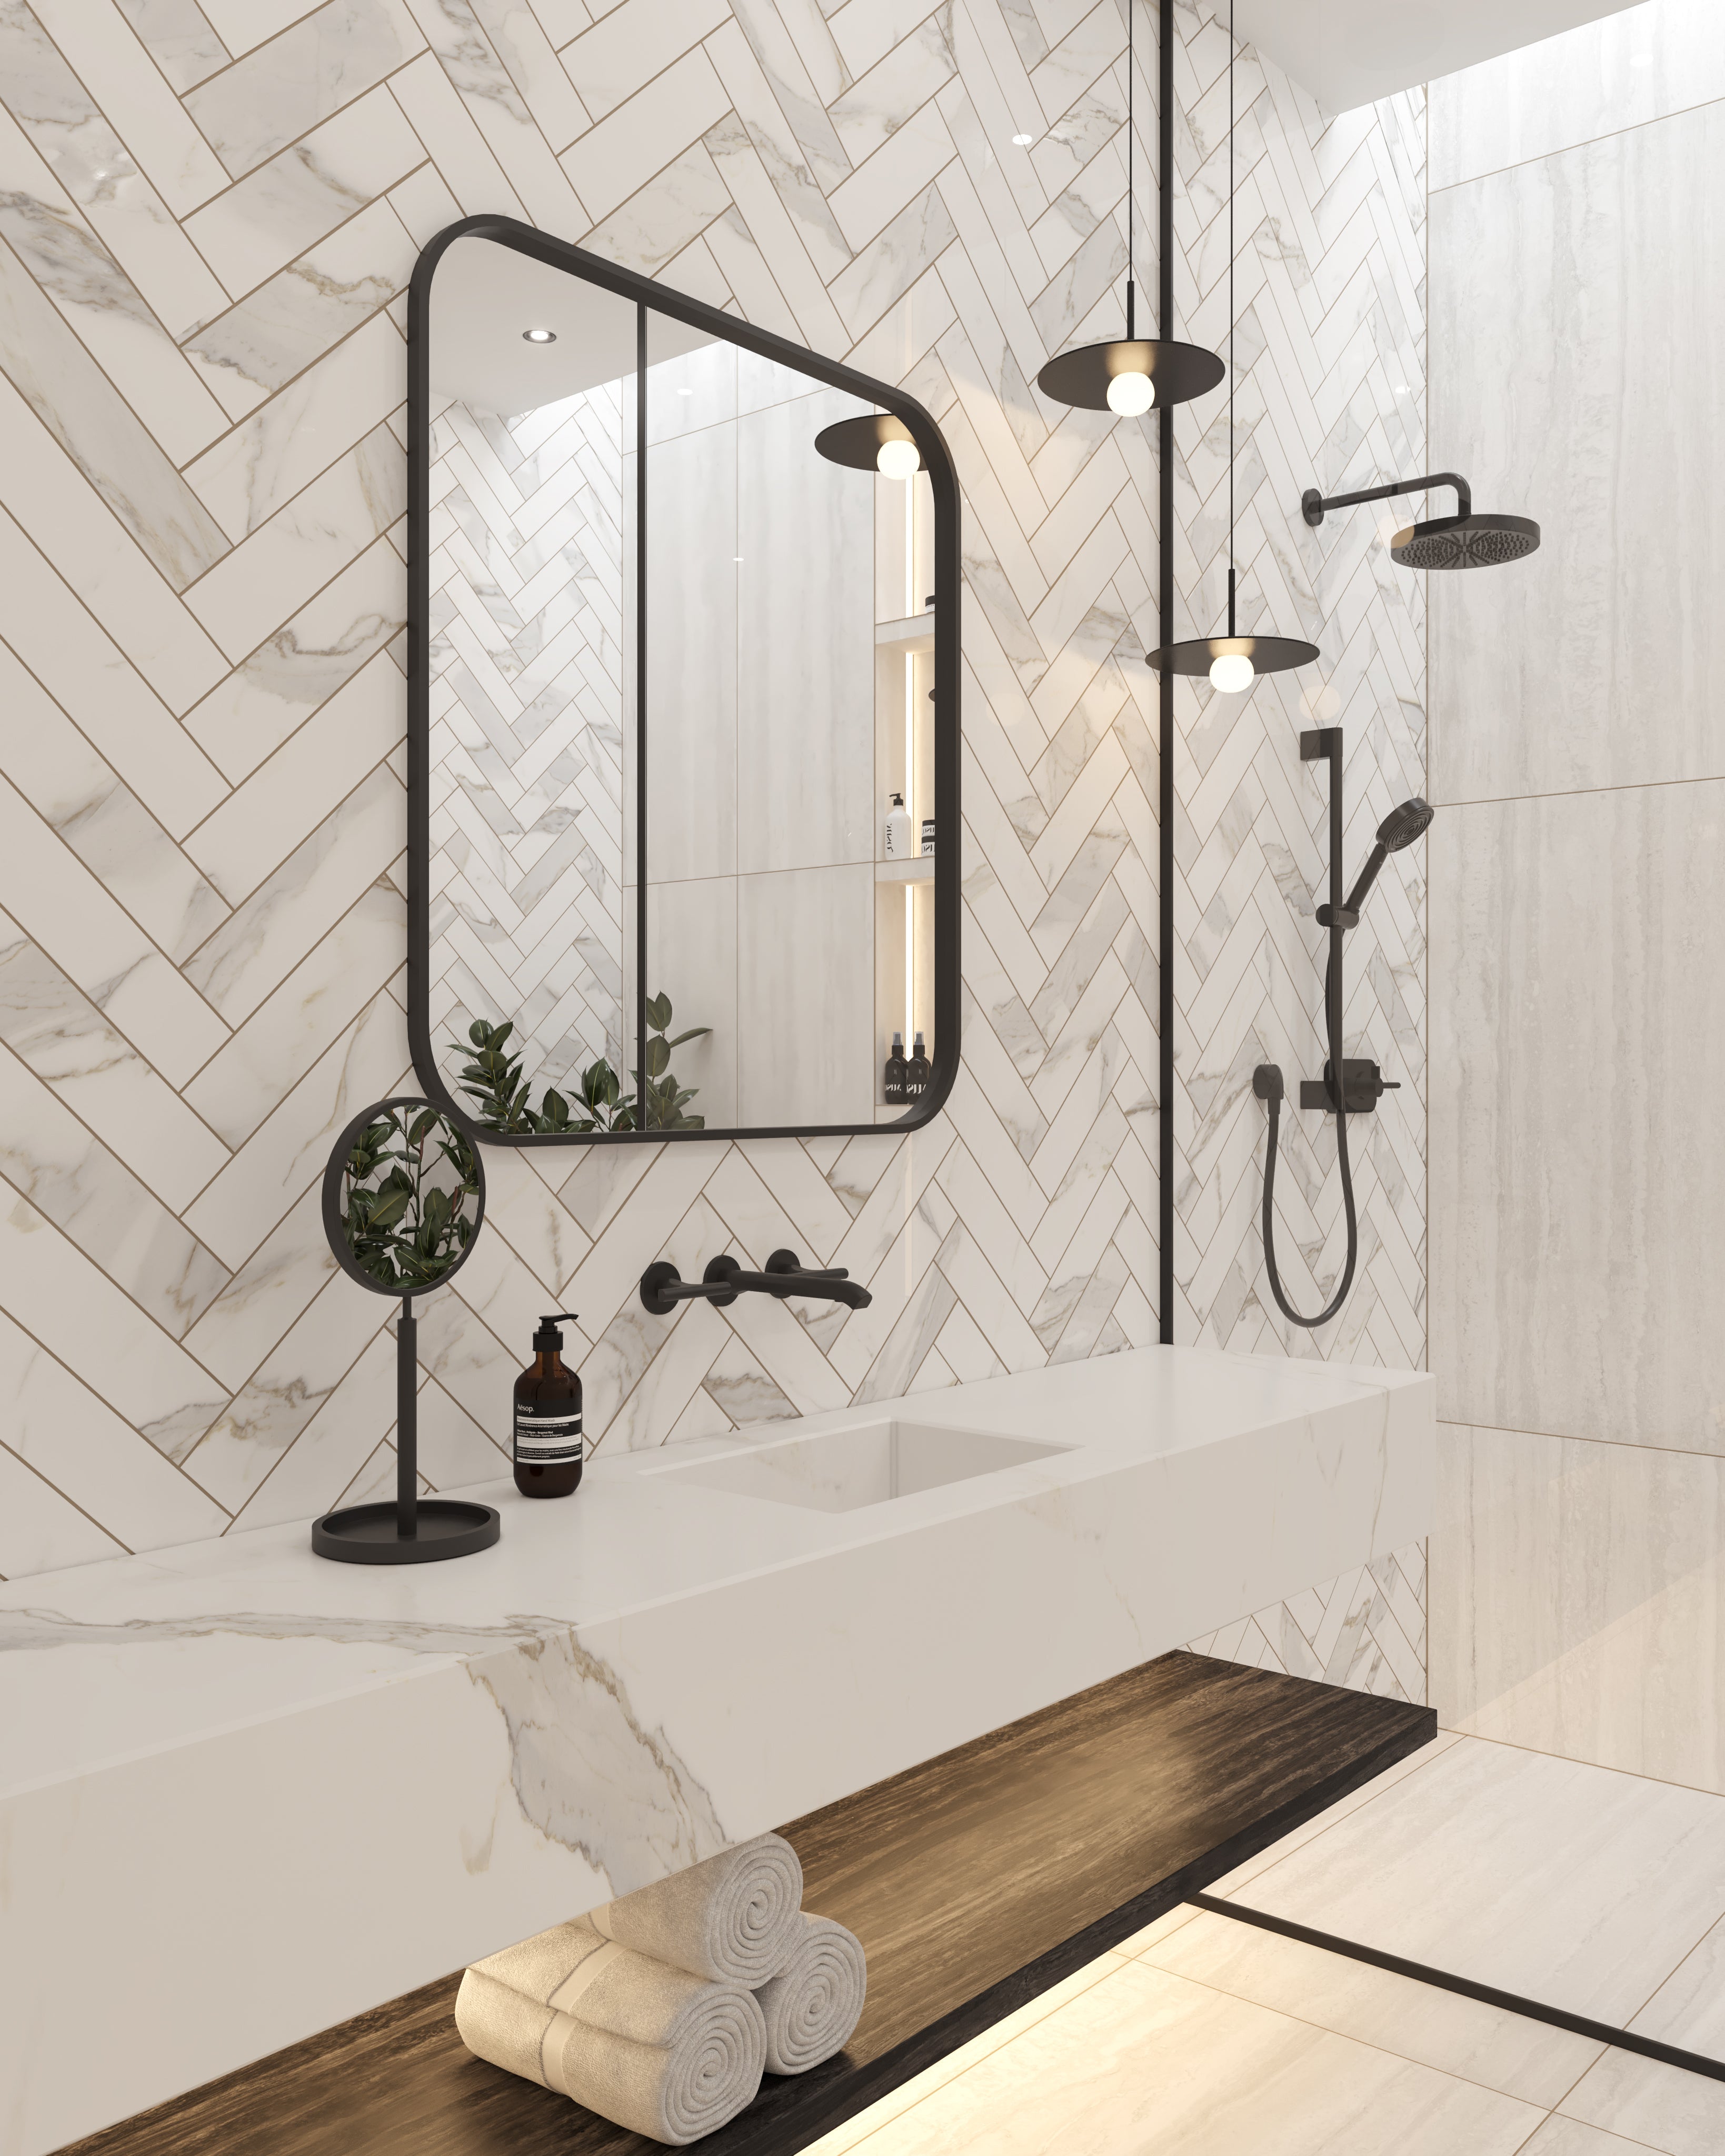 A luxurious contemporary bathroom featuring walls adorned with Aniston 3x12 subway tiles in a herringbone pattern and a floating basin featuring 48x110 porcelain panels, all in the exquisite Calacatta Top color.